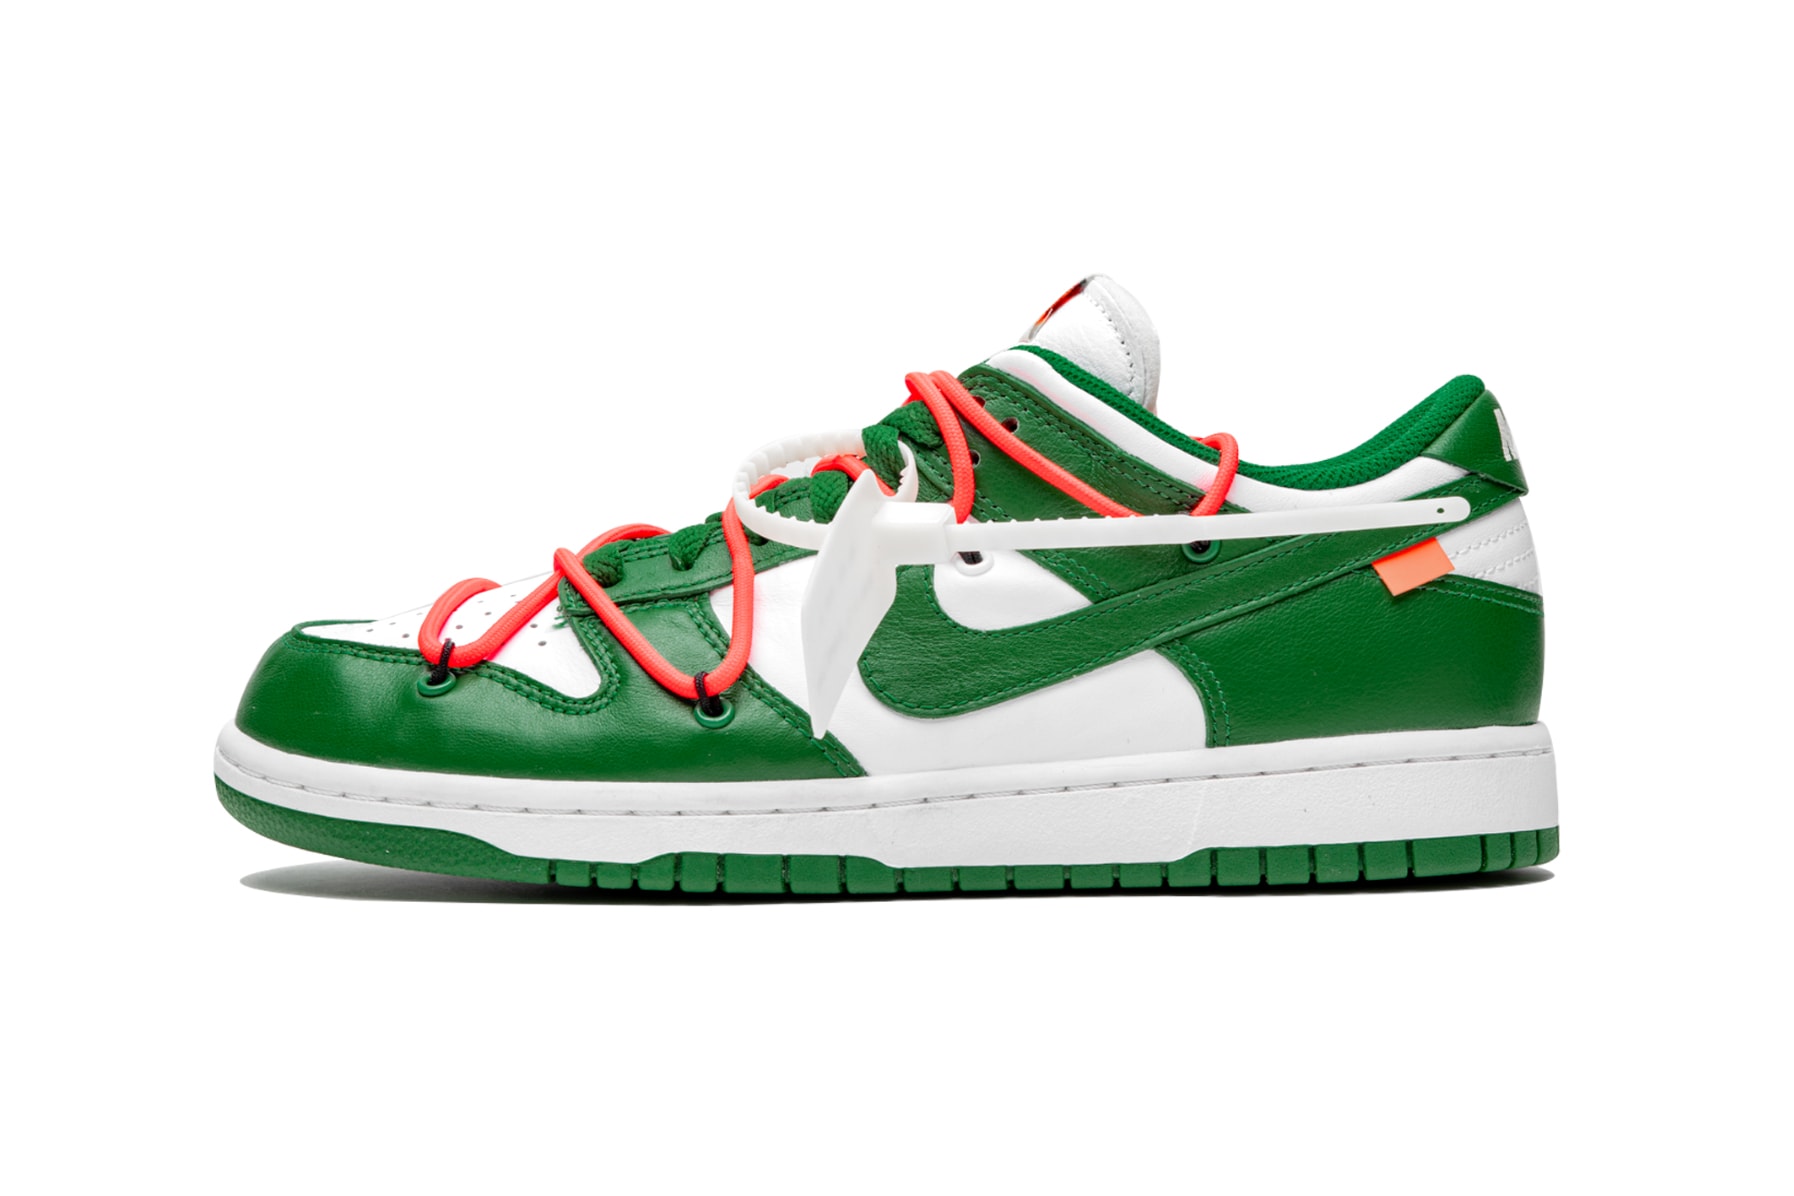 Off-White™ x Nike SB Dunk Low "Pine Green" stadium goods virgil abloh closer look better detailed collaborations release info yellow blue navy